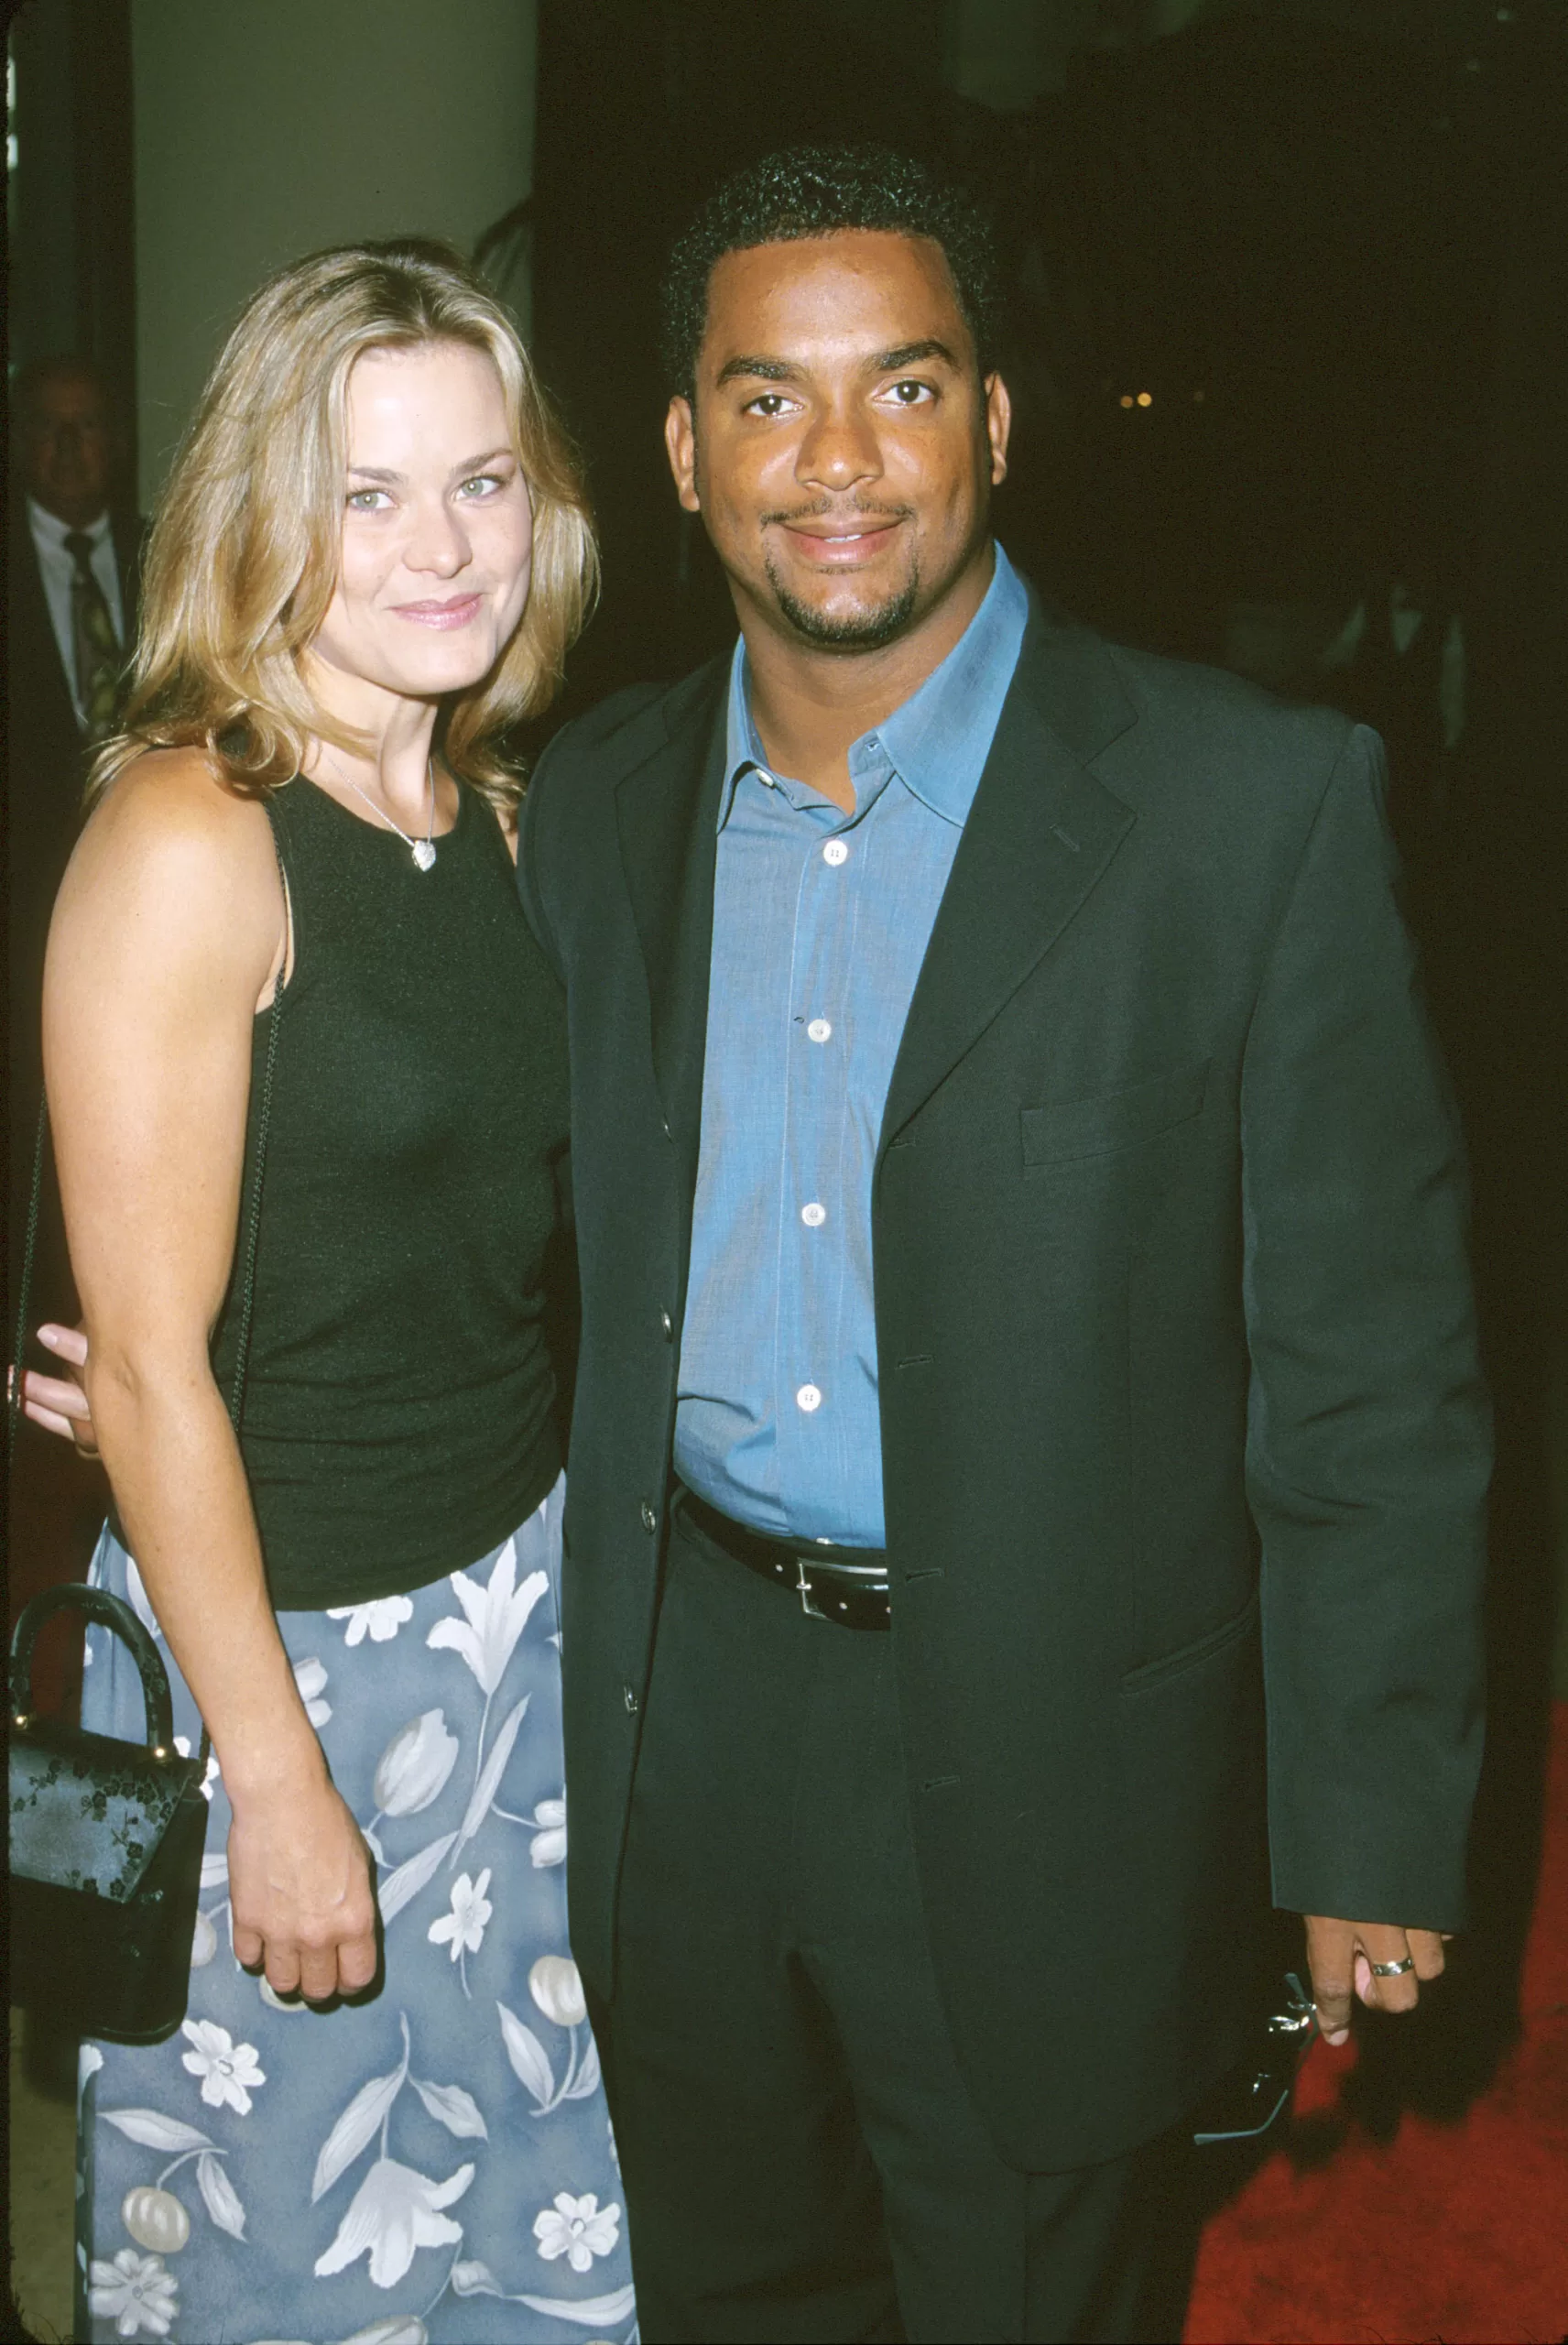 Robin Stapler: A British Actress and Former Spouse of Alfonso Ribeiro